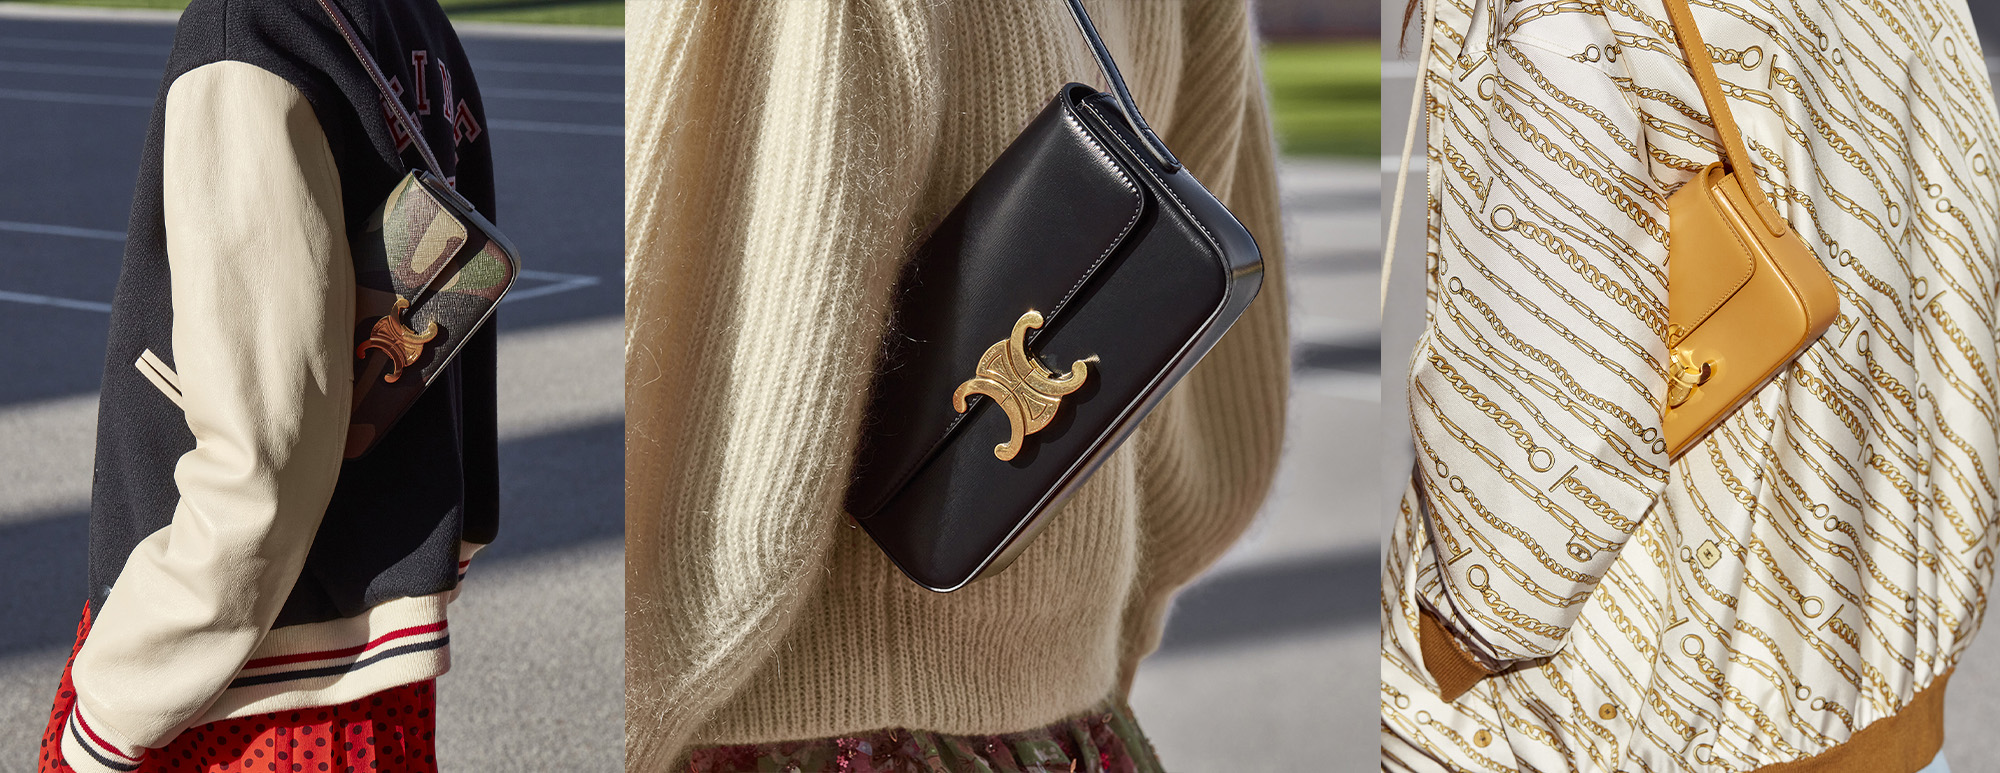 Launching today: The Celine Triomphe Shoulder Bag — a smaller shape